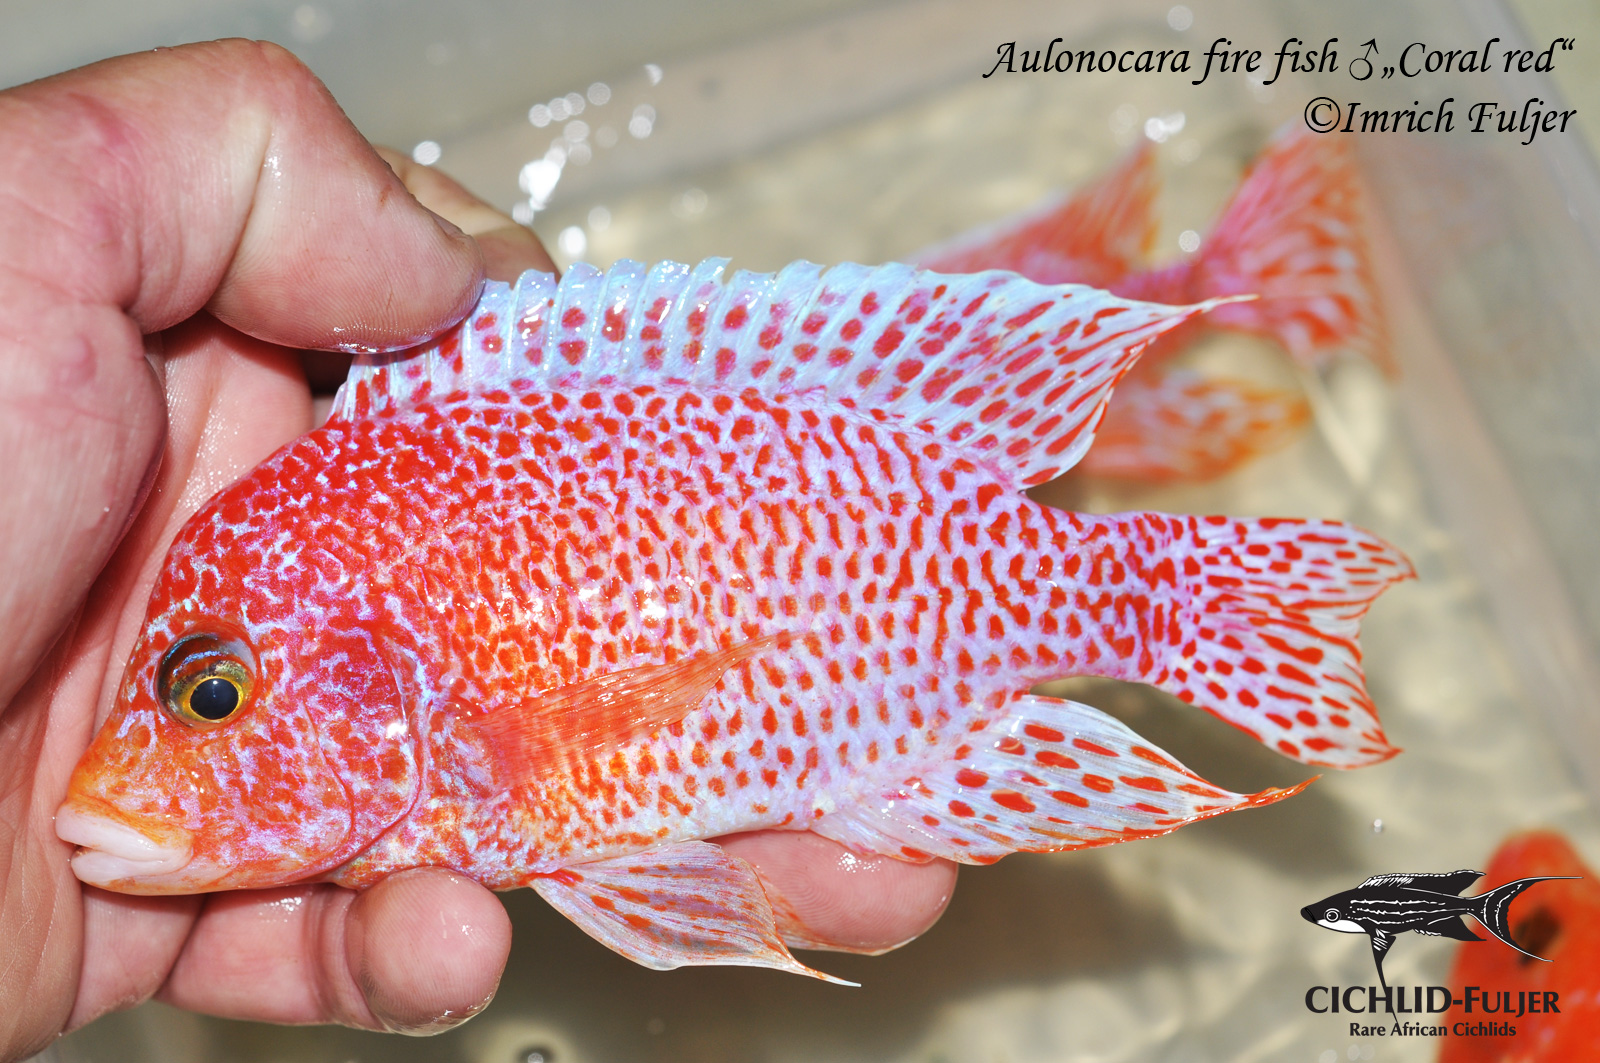 Aulonocara fire fishCoral red 1